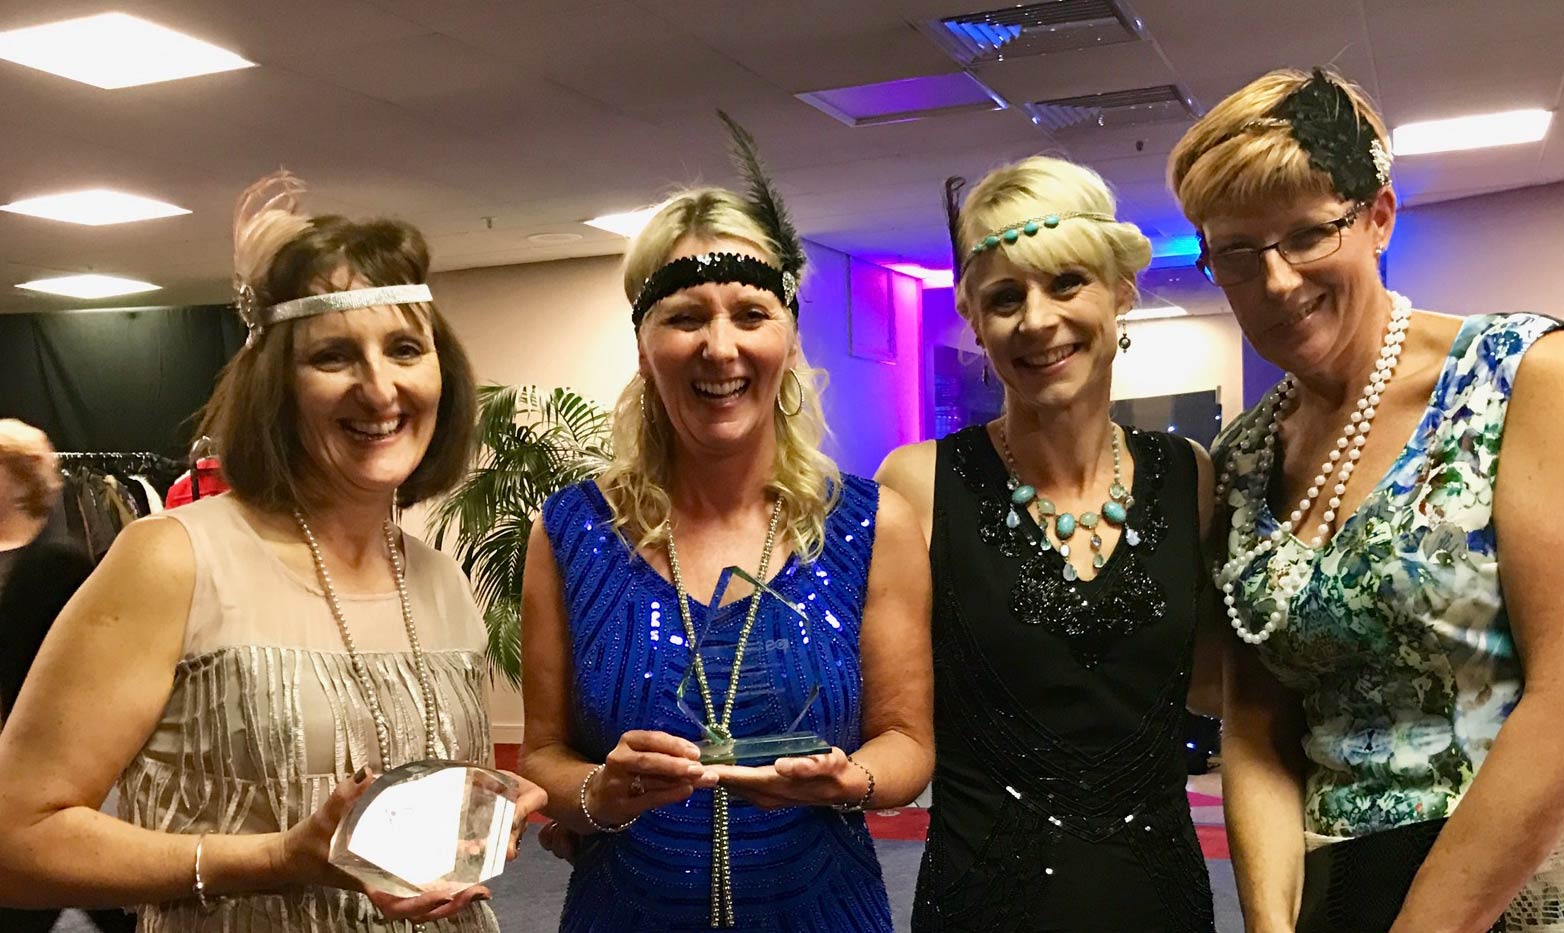 at the 1920s themed Awards Evening (left to right): Gill Johnson, Community Infection Prevention and Control  Nurse; Sonya Ashworth, Team Lead Community Infection Prevention and Control; Helen Degnan, Community Infection Prevention and Control Support Nurse; and Kath Banfield, Matron, Infection Prevention and Control.